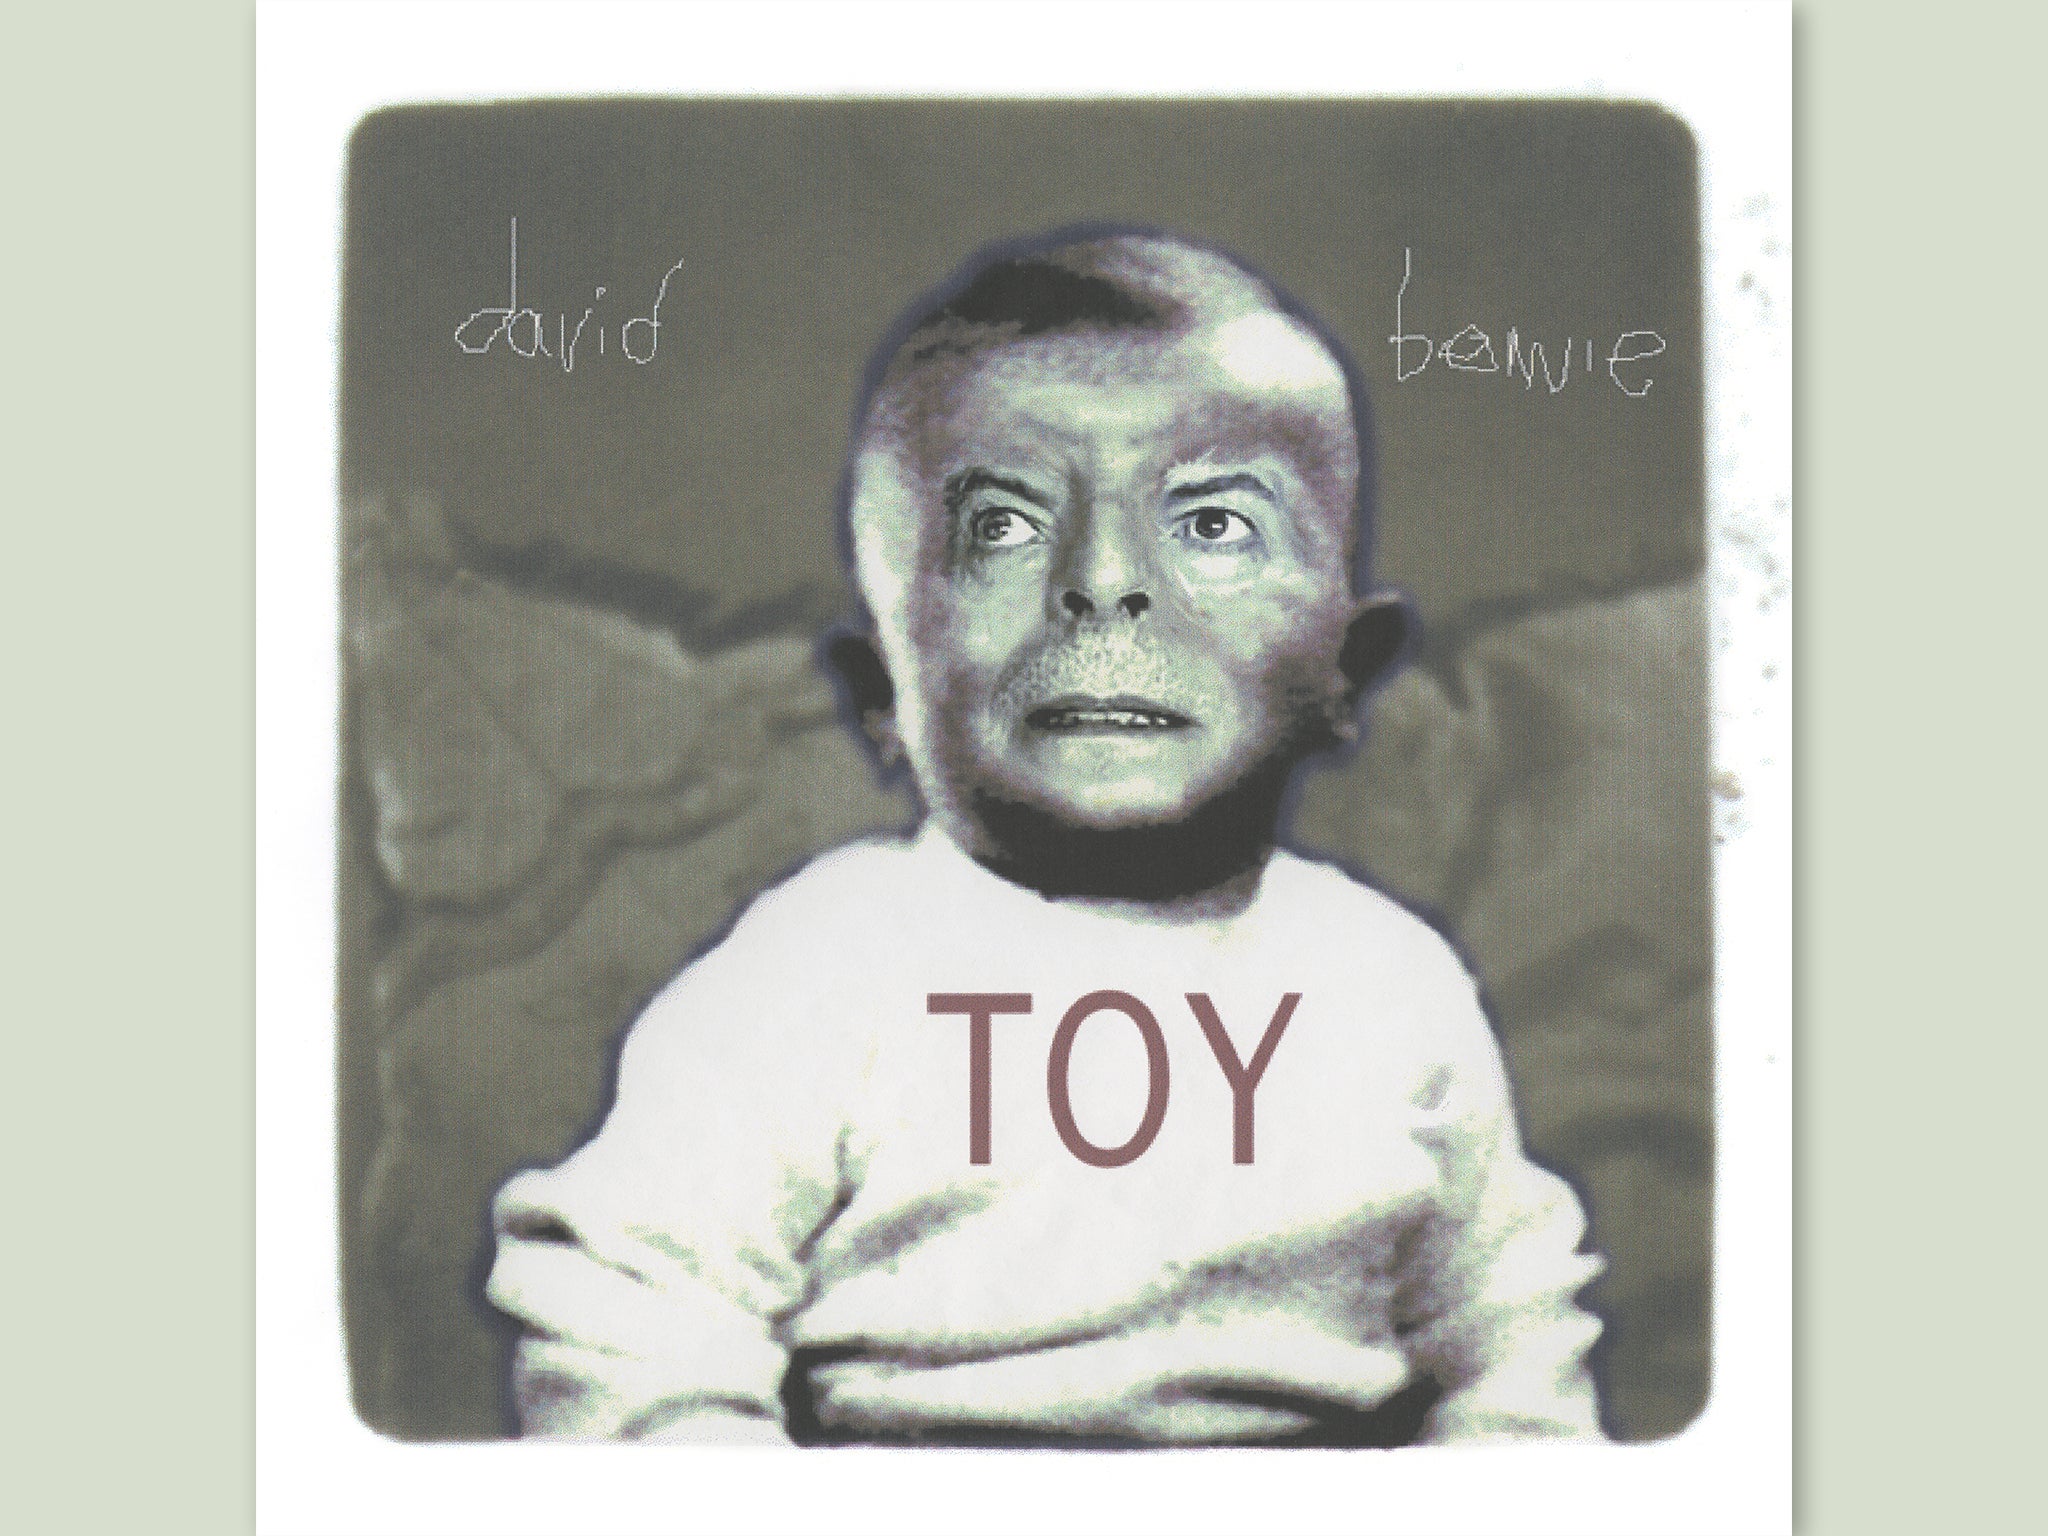 David Bowie review, Toy Alive with the sound of a band in their prime The Independent image